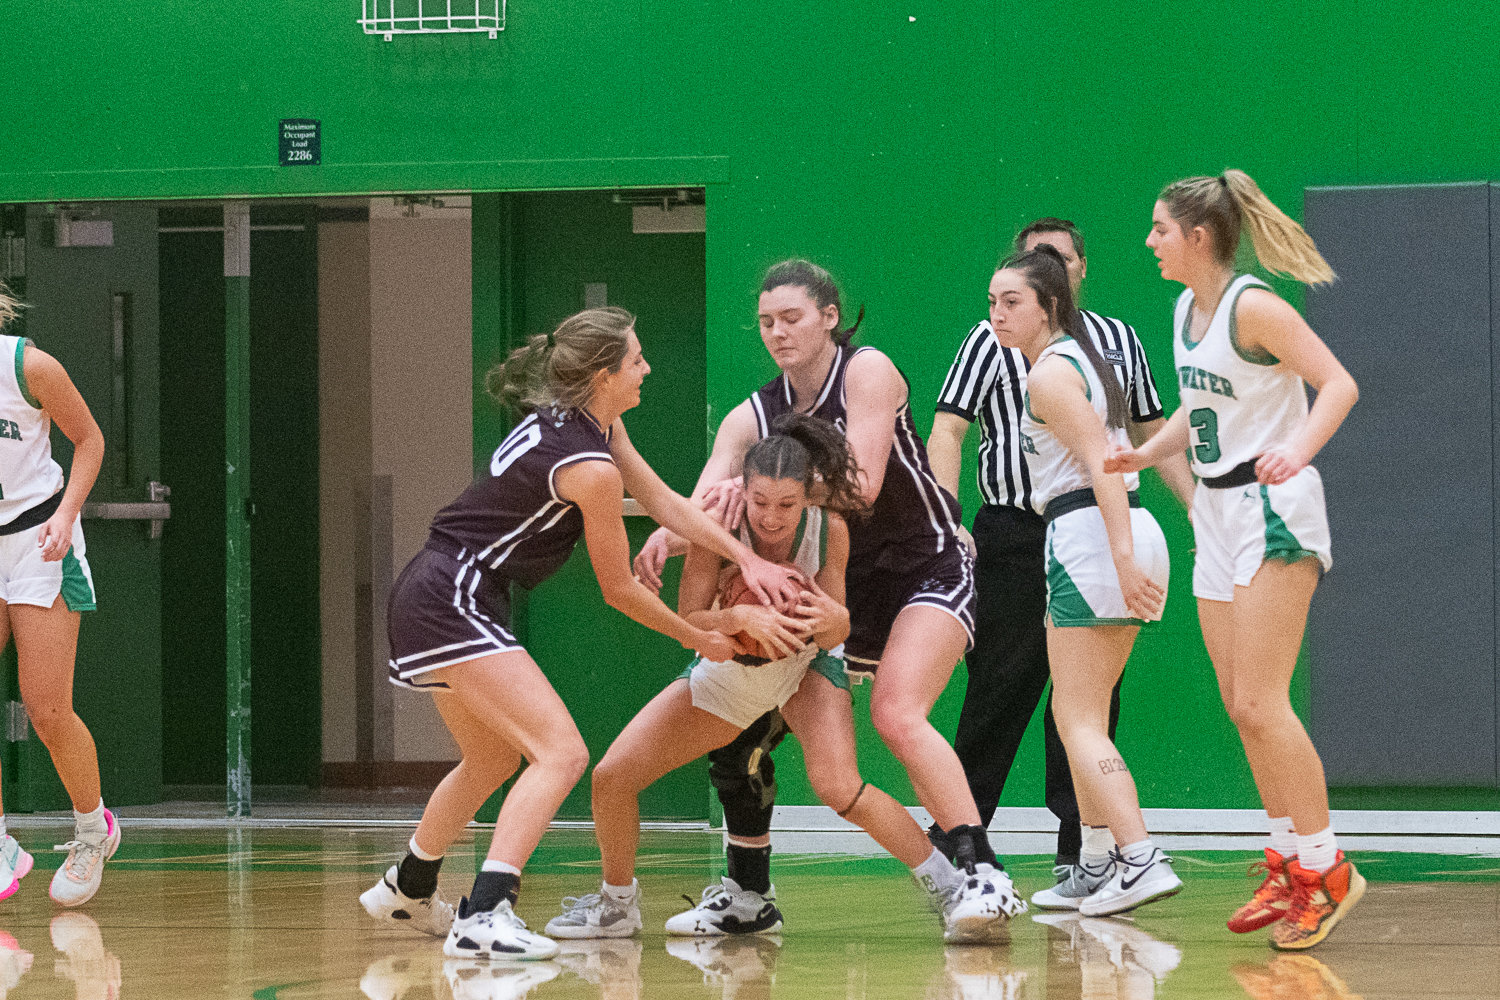 Regan Brewer tries to fight off two Montesano players for possession during the second half of Tumwater's 37-21 loss to the Bulldogs on Dec. 22.